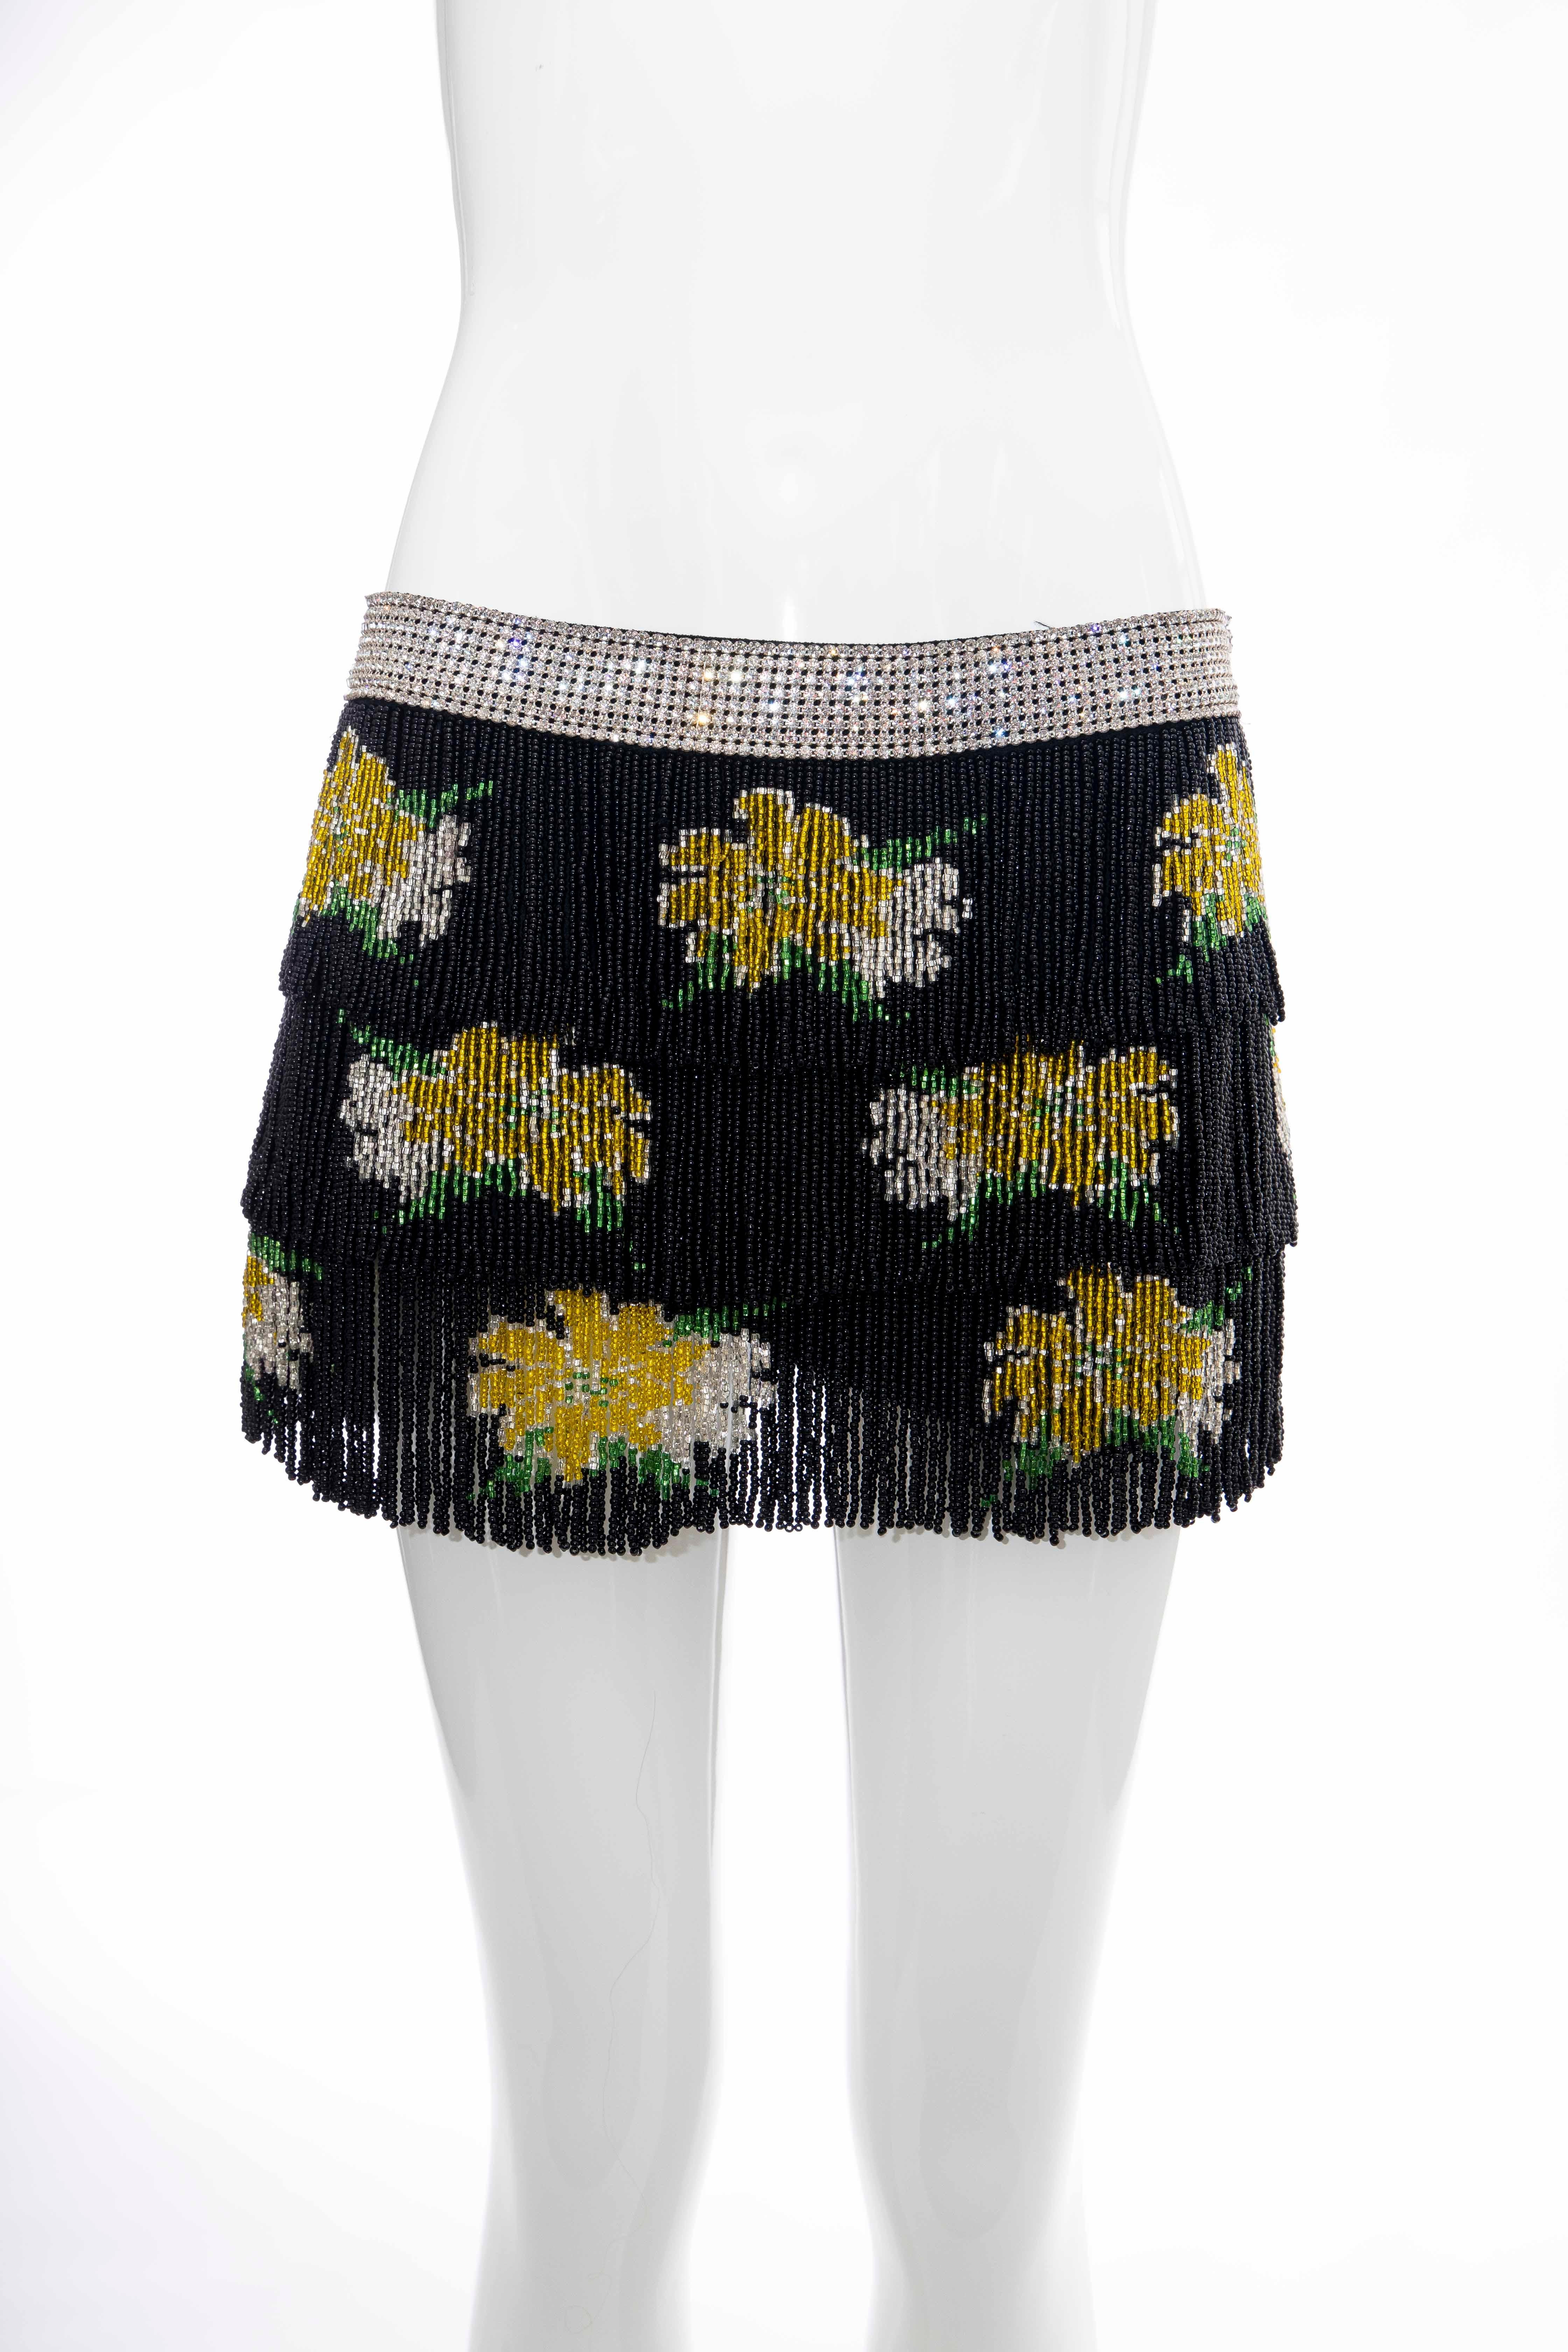 Dolce Gabbana, Runway Spring-Summer 2000, black silk mini skirt with diamanté waistband, three tiered black beaded fringe, zip closure at side and fully lined in silk.

IT. 38, US. 2

Waist: 29, Hip: 34, Length: 11

Fabric: 100% Silk; Lining 100%